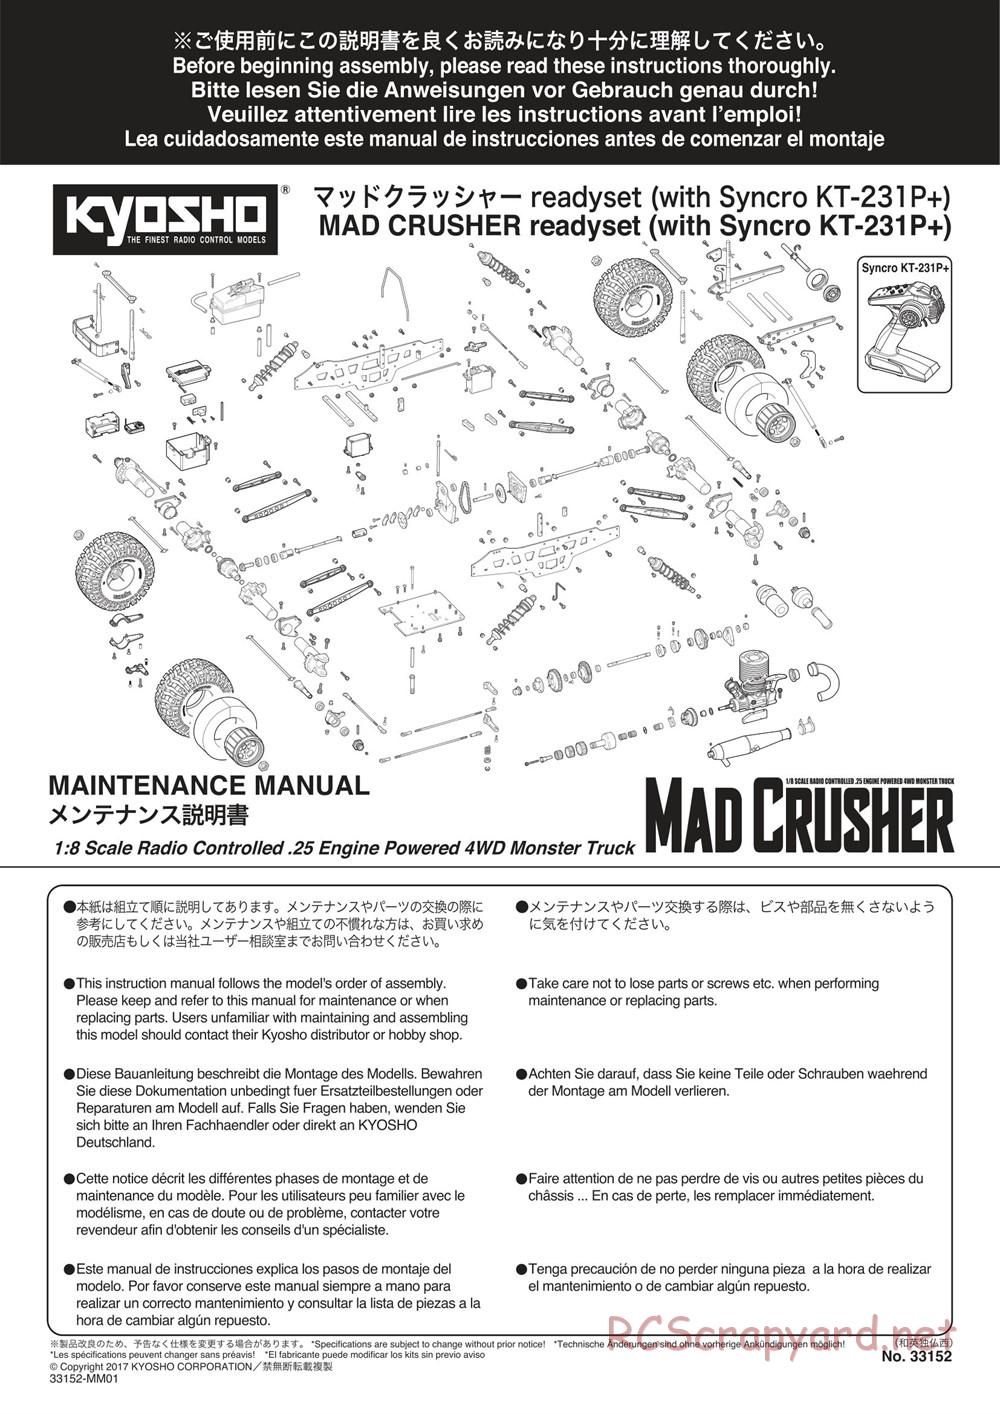 Kyosho - Mad Crusher - Manual - Page 1